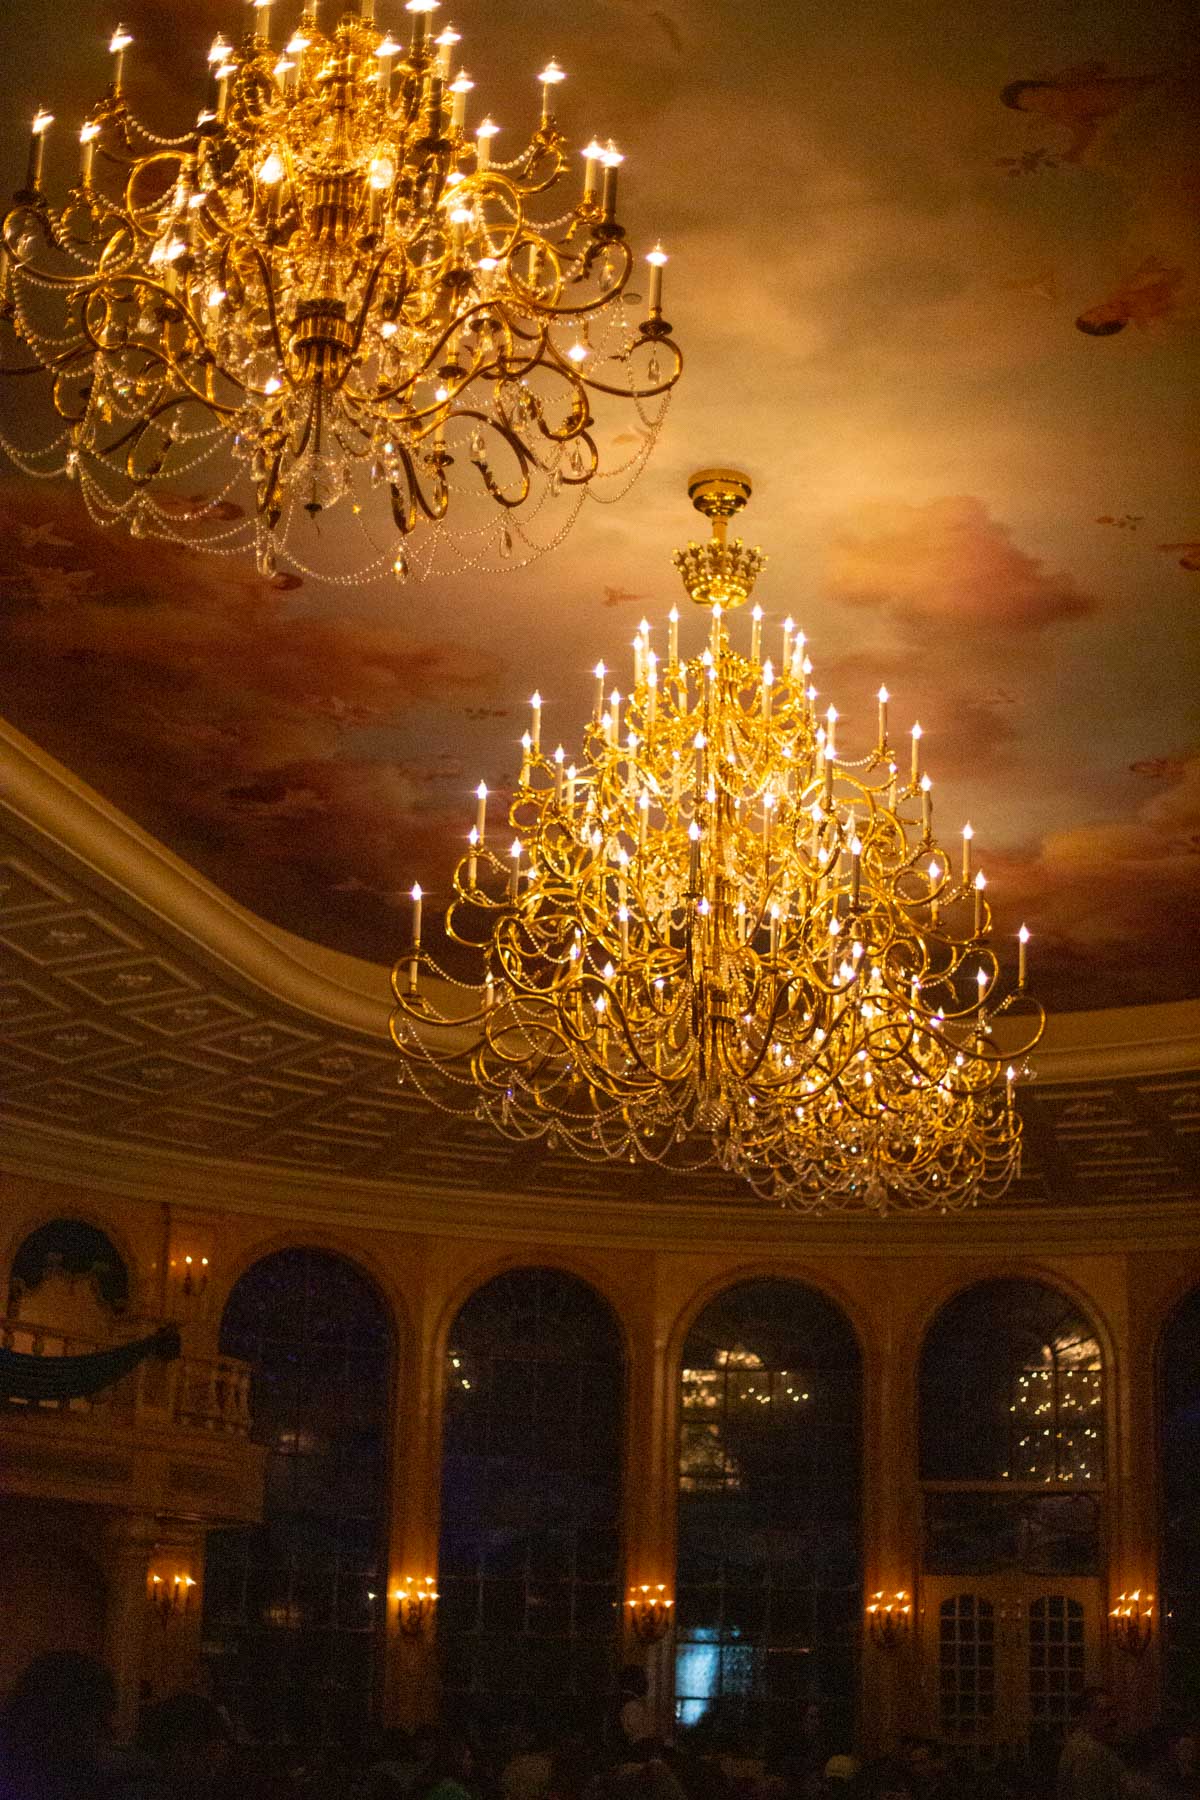 The gorgeous gold chandeliers inside the grand ballroom.